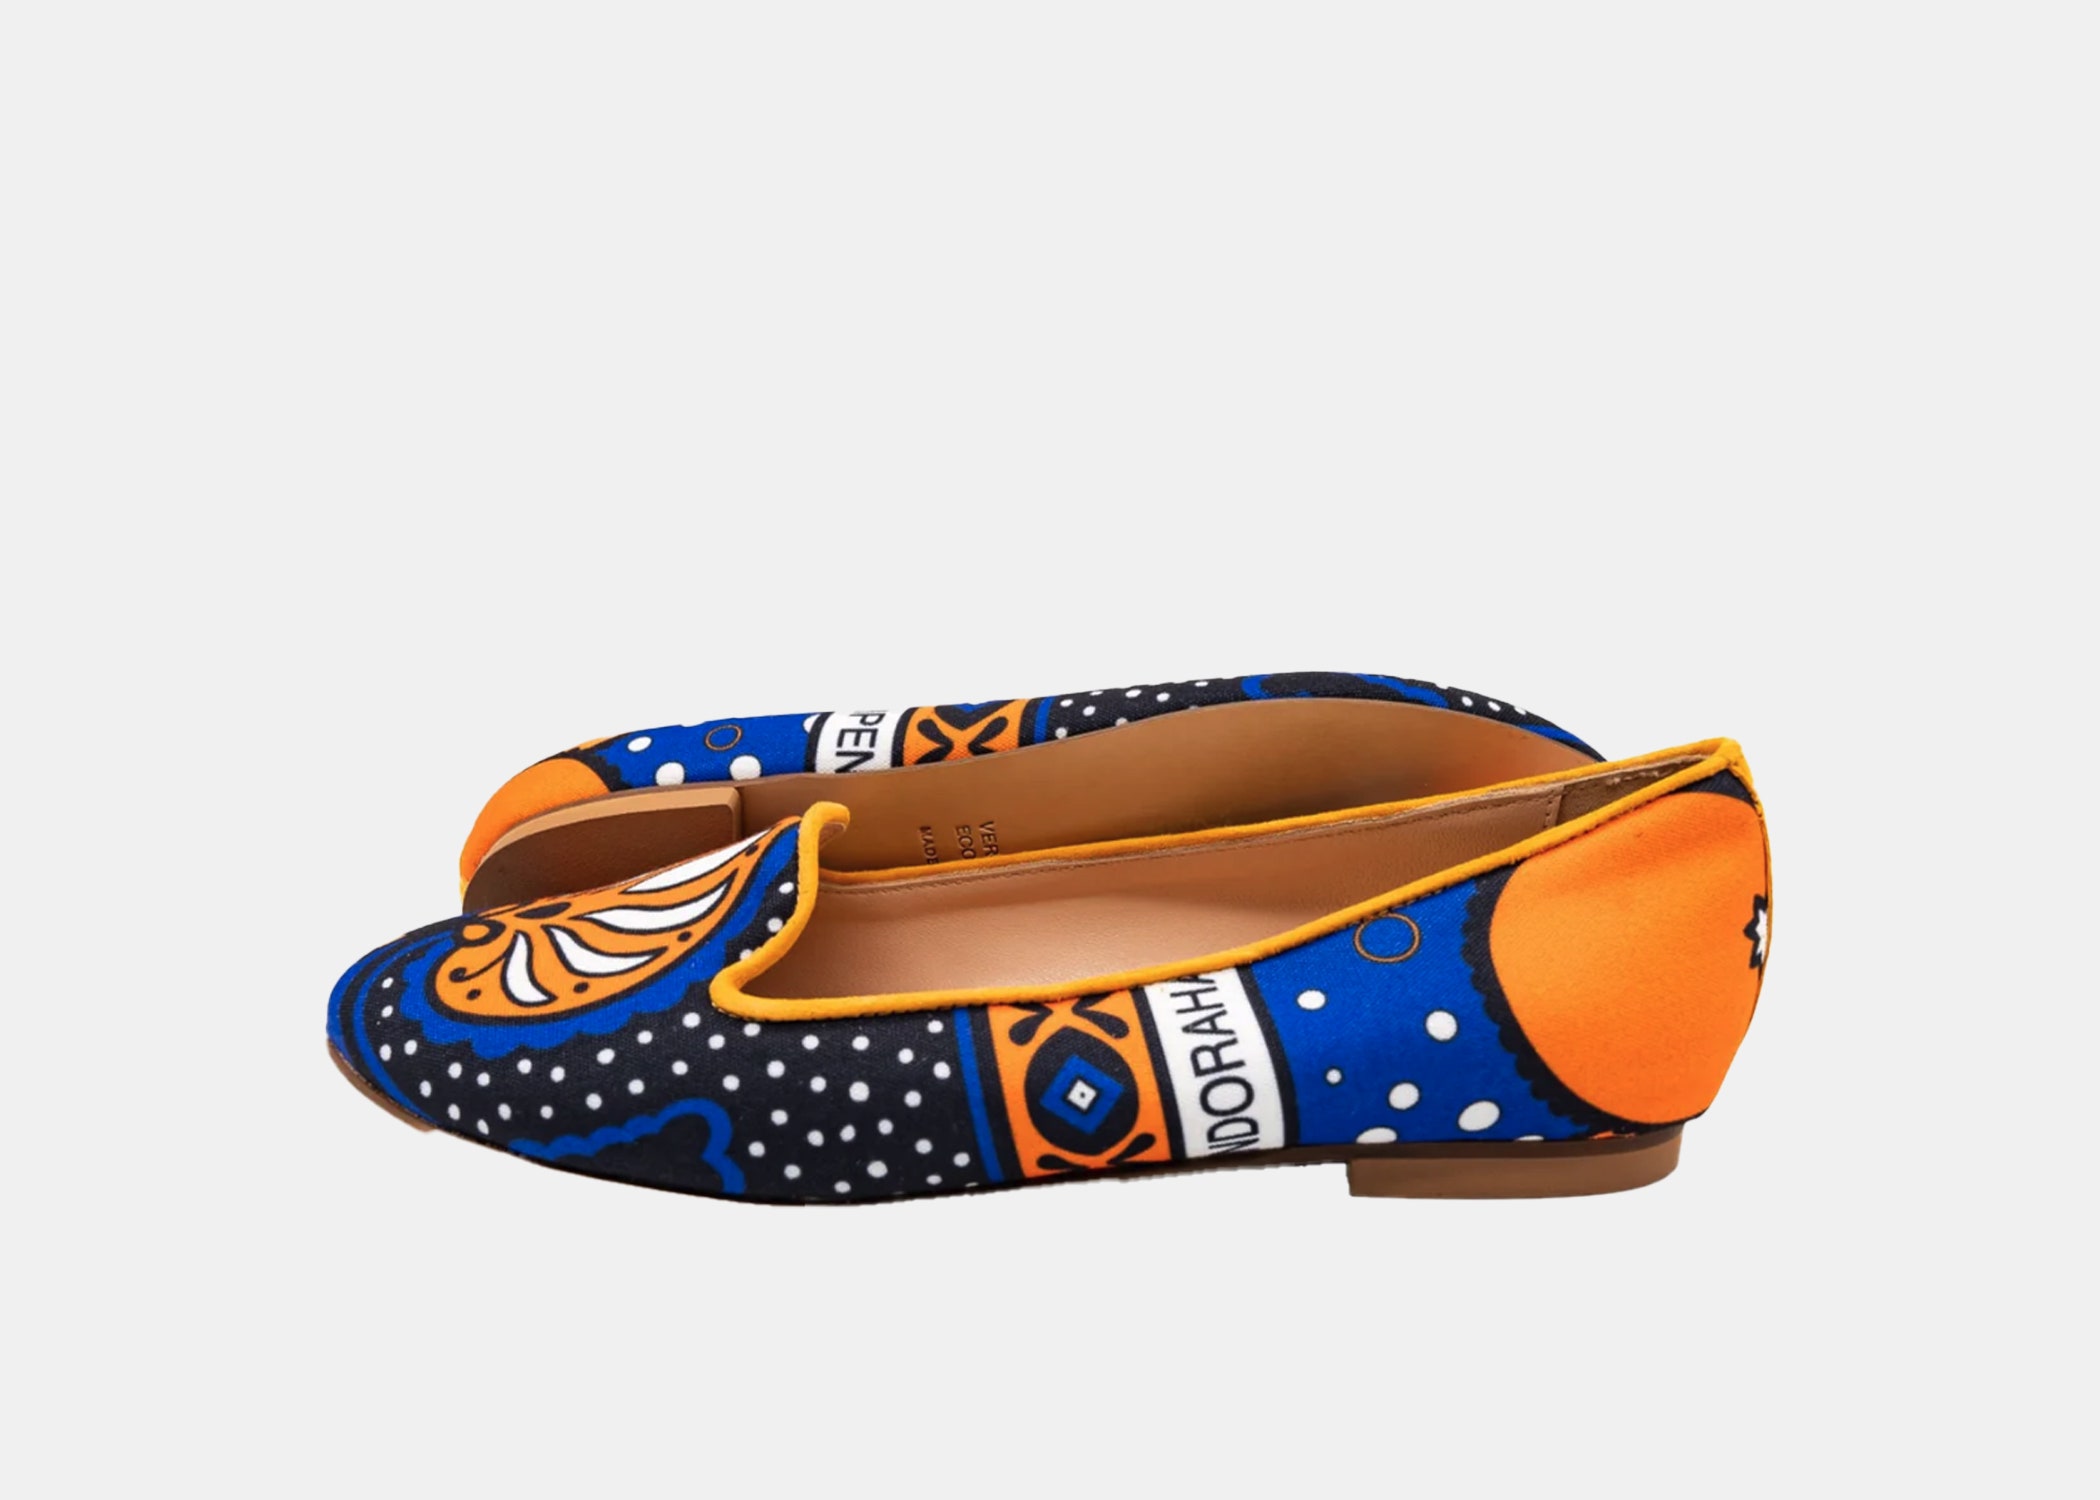 Soft Italian leather meets traditional African Kanga fabric in these bold and lightweight ballet flats. Each pair of shoes has a script with a Swahili proverb or saying. The slides are made to be breathable, taking you comfortably from one destination to the next. The shoes are named after the founder, who was born in Ethiopia and was inspired by the bright and beautiful colors of her childhood. $197, Amazon. <a href="https://www.amazon.com/Bizu-Ballerina-Leather-African-Textile/dp/B0C483GTF8">Get it now!</a><p>Sign up to receive the latest news, expert tips, and inspiration on all things travel</p><a href="https://www.cntraveler.com/newsletter/the-daily?sourceCode=msnsend">Inspire Me</a>